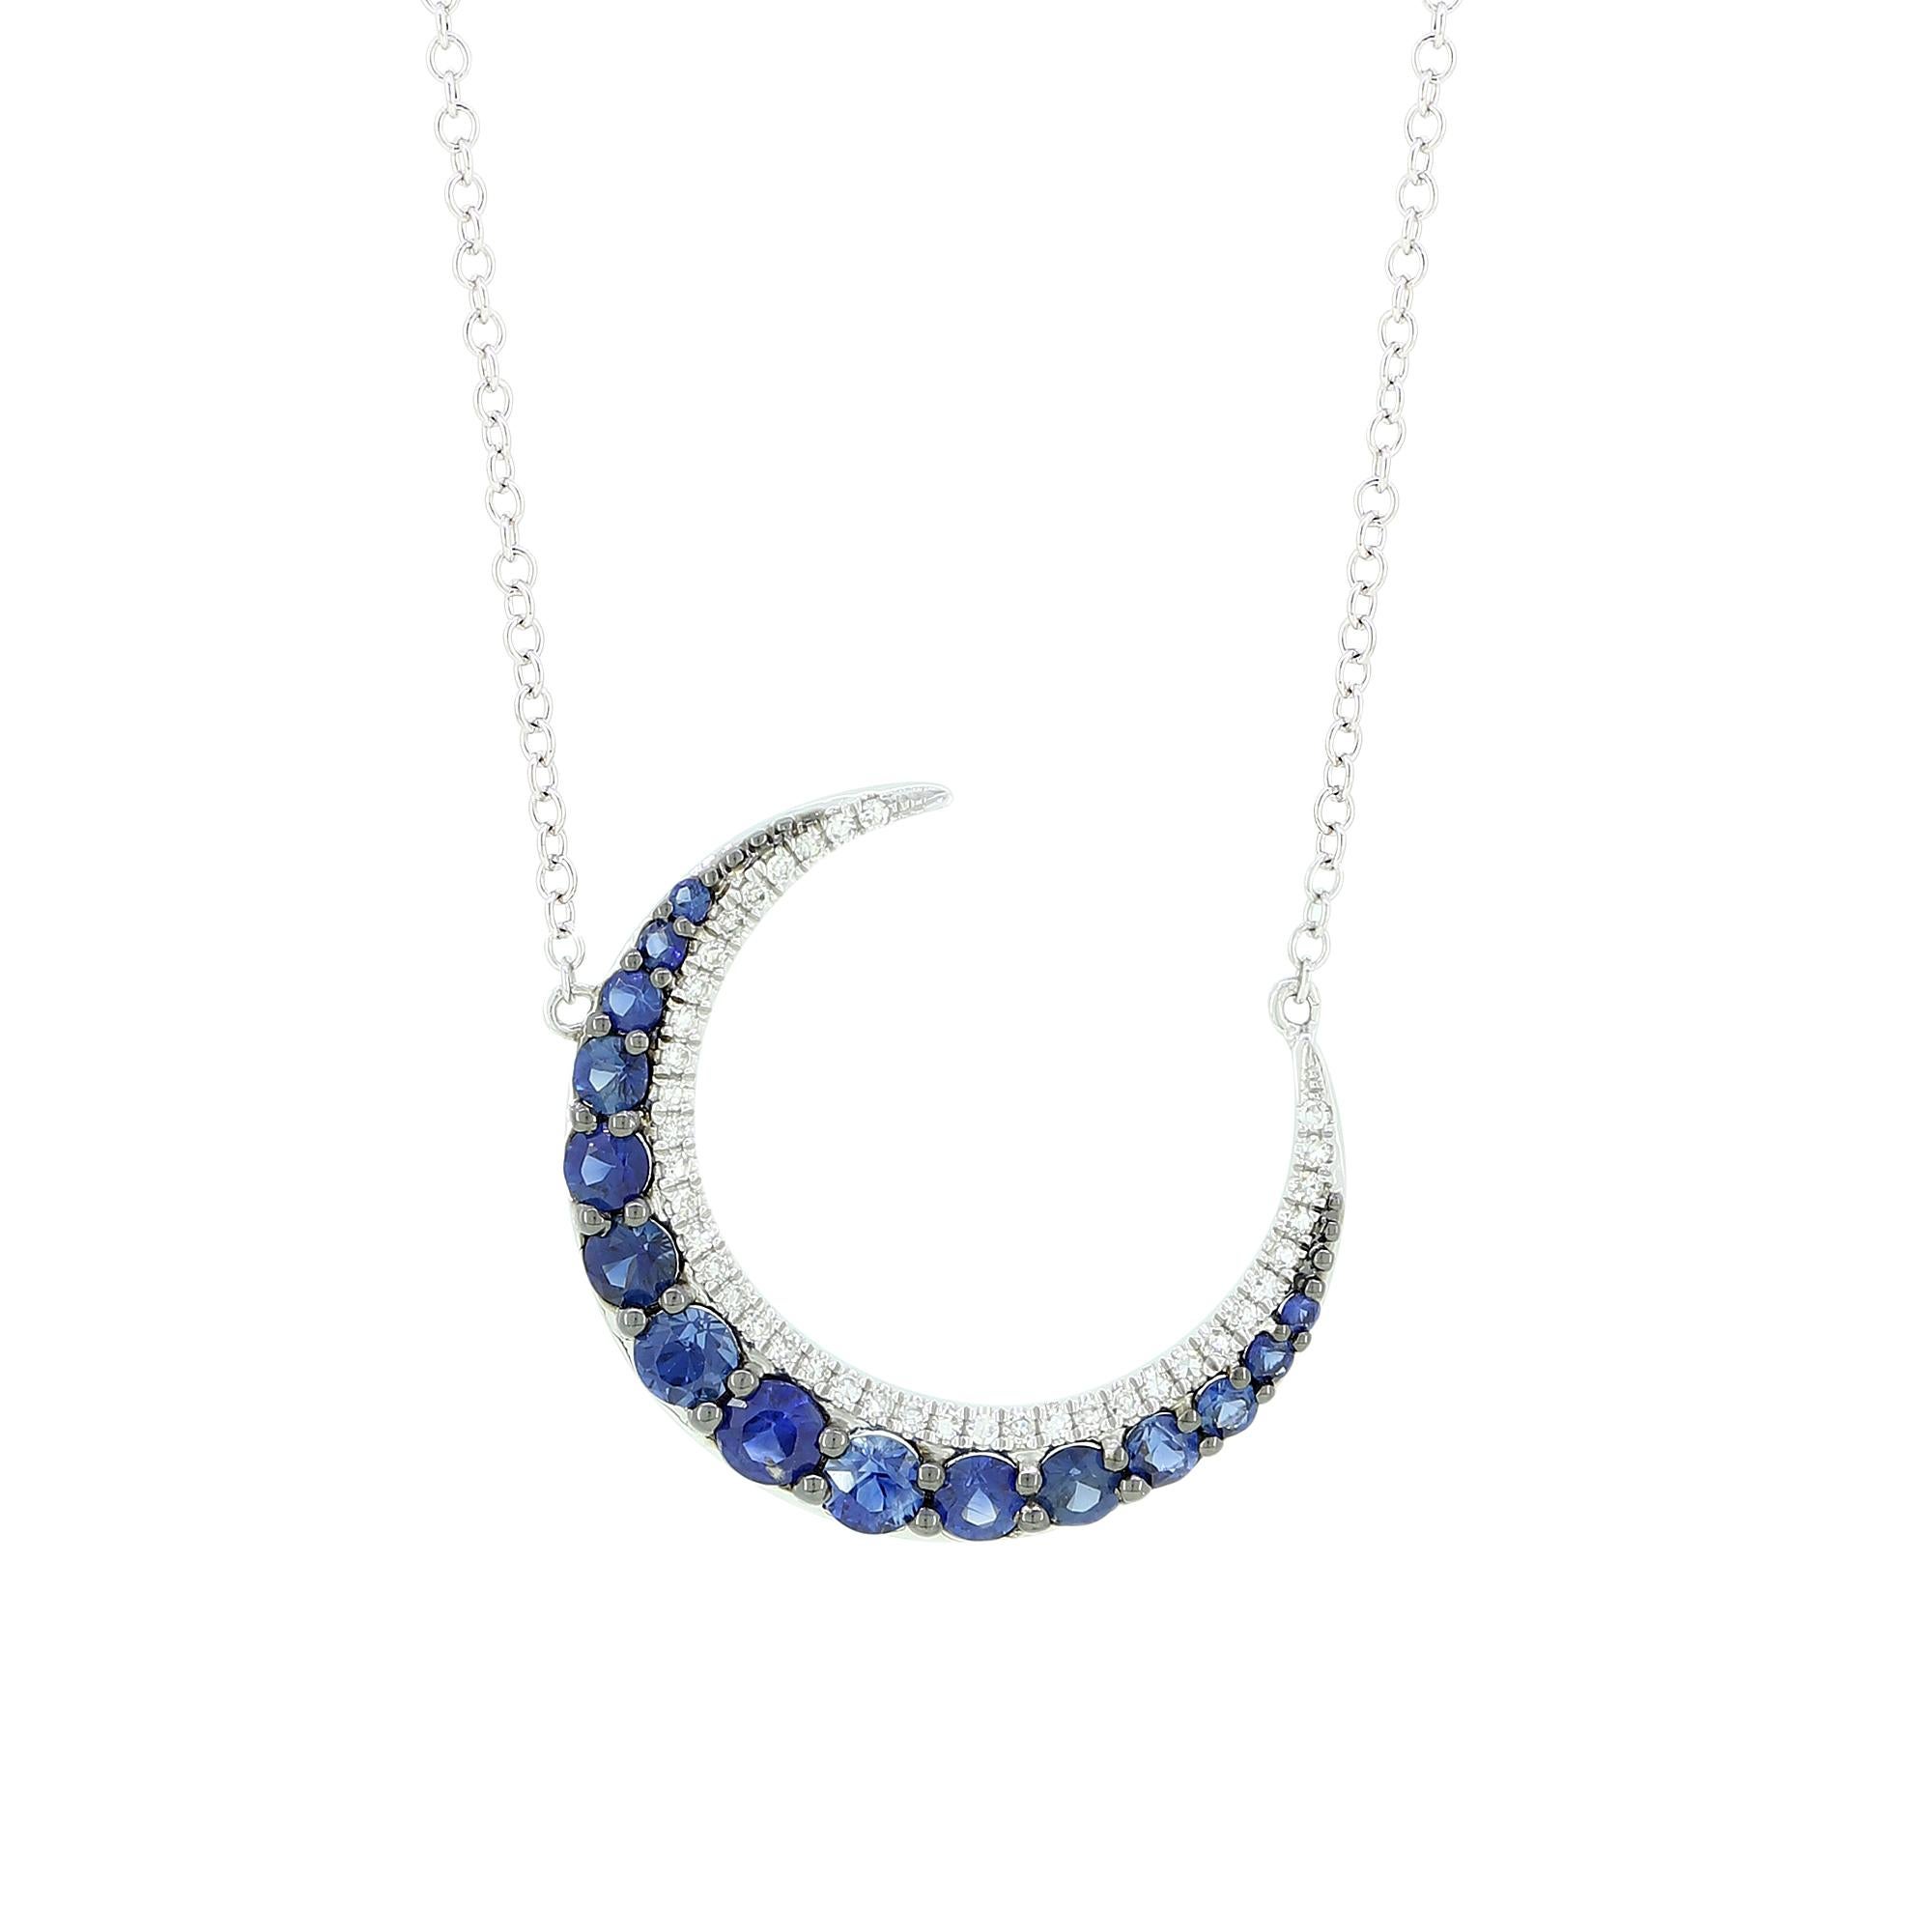 This Gemistry celestial spectacle is a reminder that you deserve the moon. This necklace swings in 18k white gold crescent moon lit with .74 ct. t.w. round prong set blue sapphire and pave diamonds. Stationed along a 15